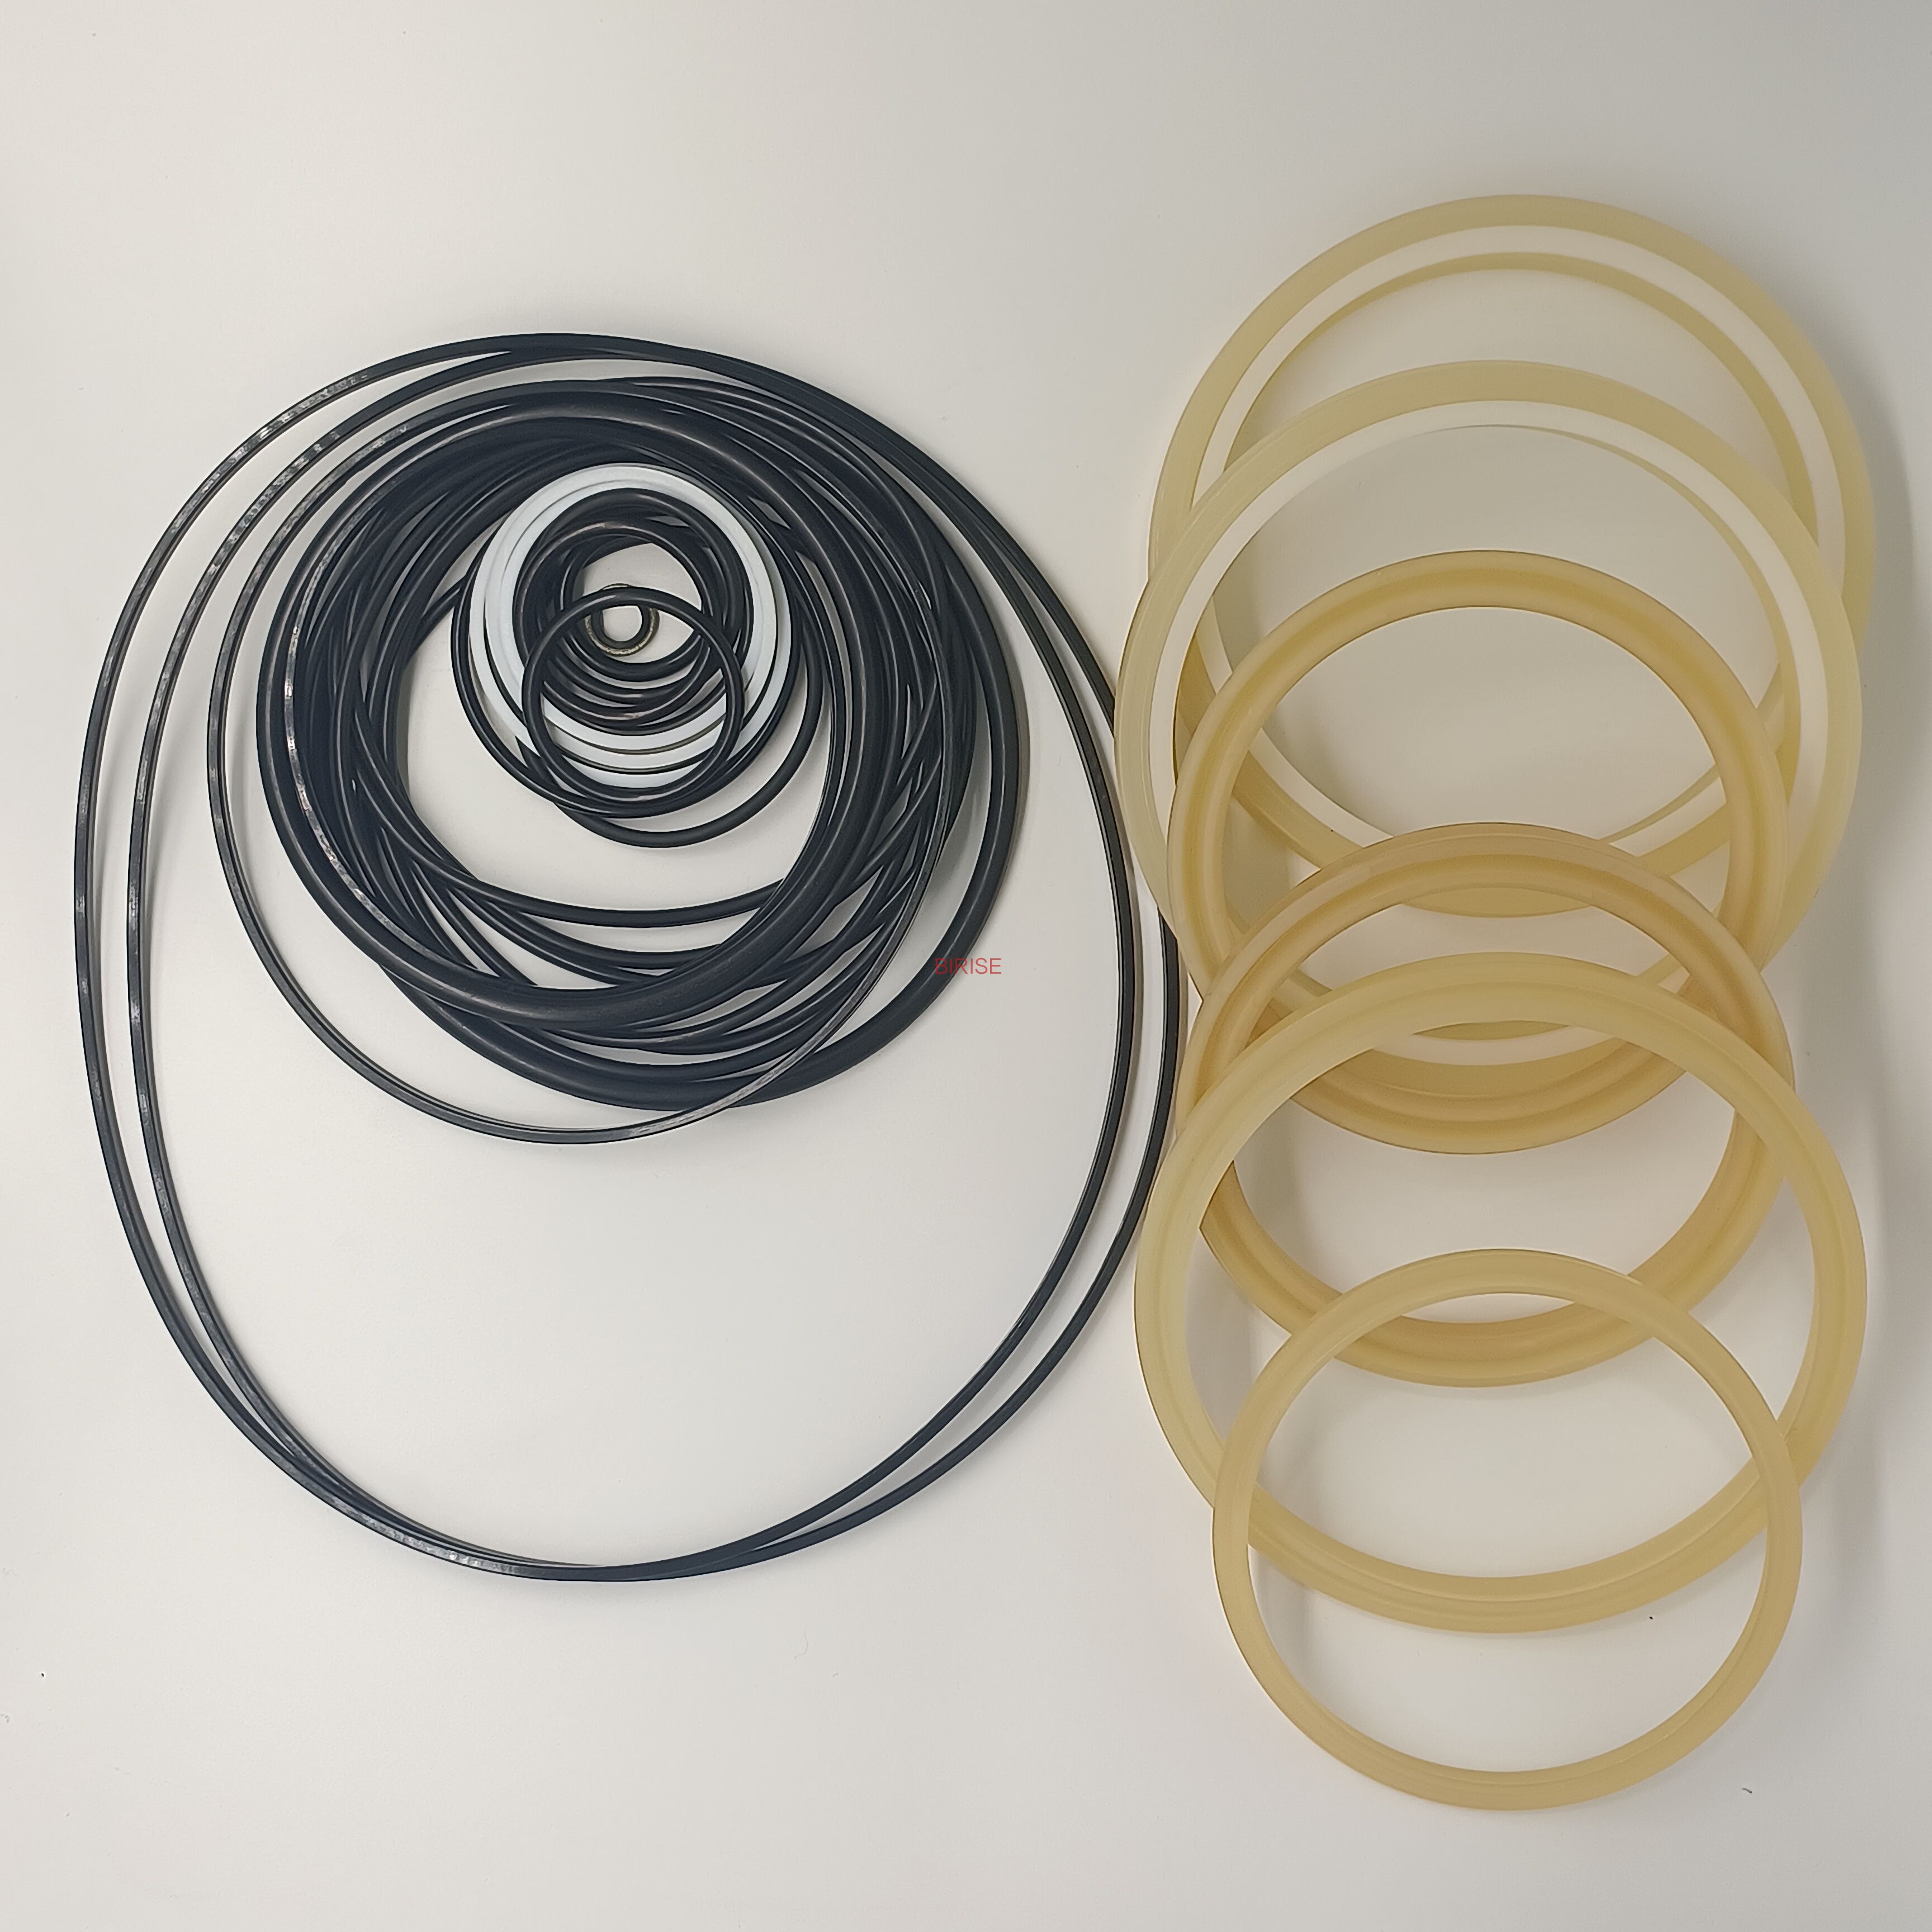 Hydraulic Breaker Seal Kits for Various Components